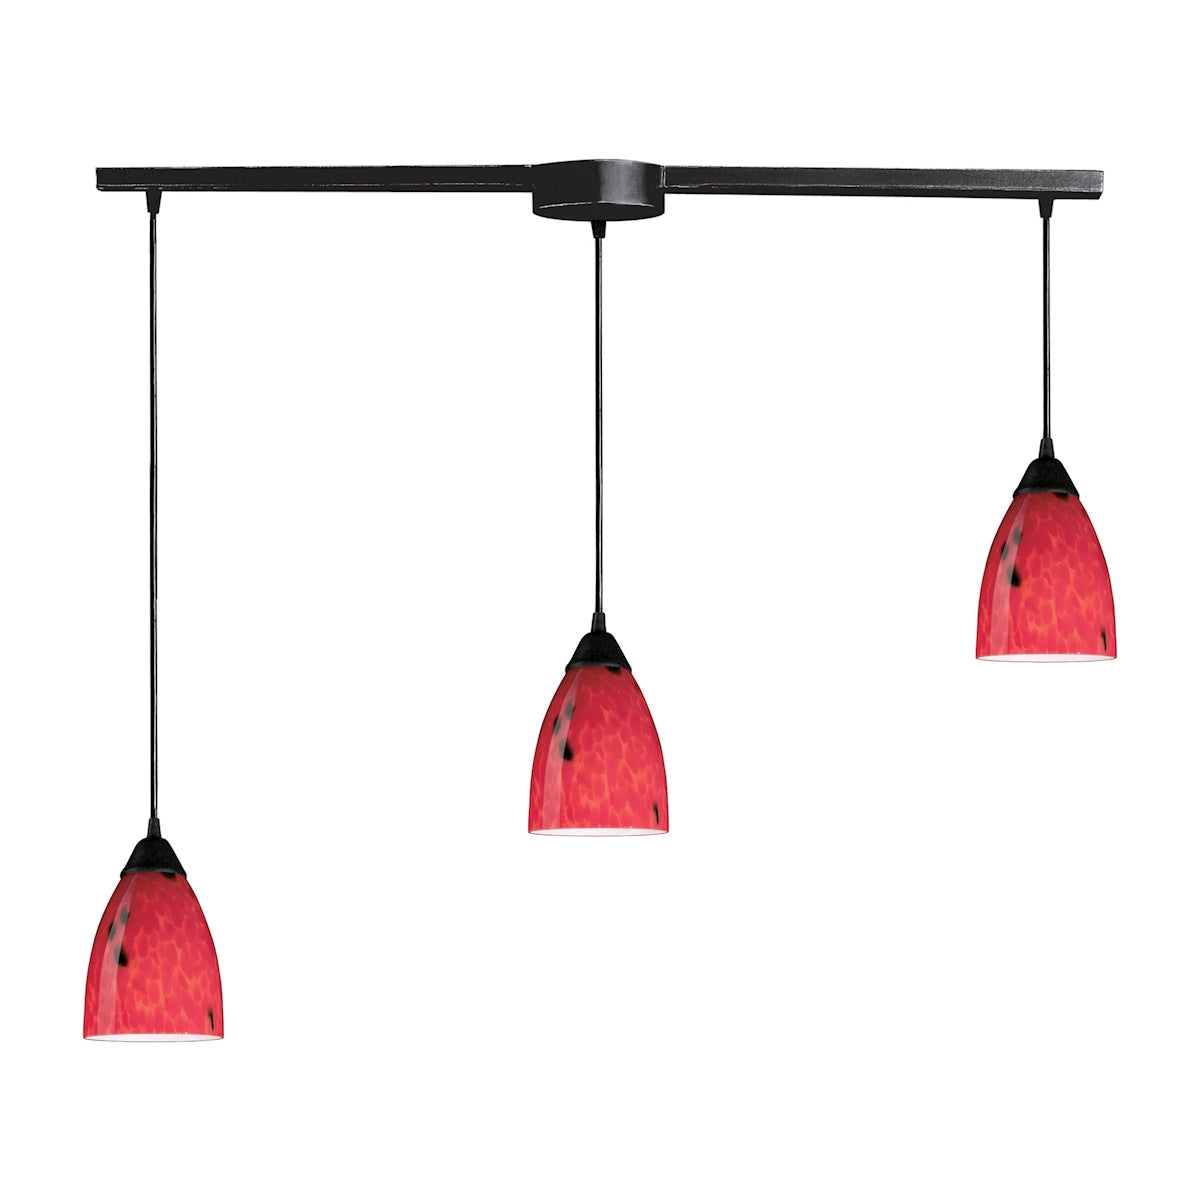 ELK Lighting 406-3L-FR Classico 3-Light Linear Pendant Fixture in Dark Rust with Fire Red Glass